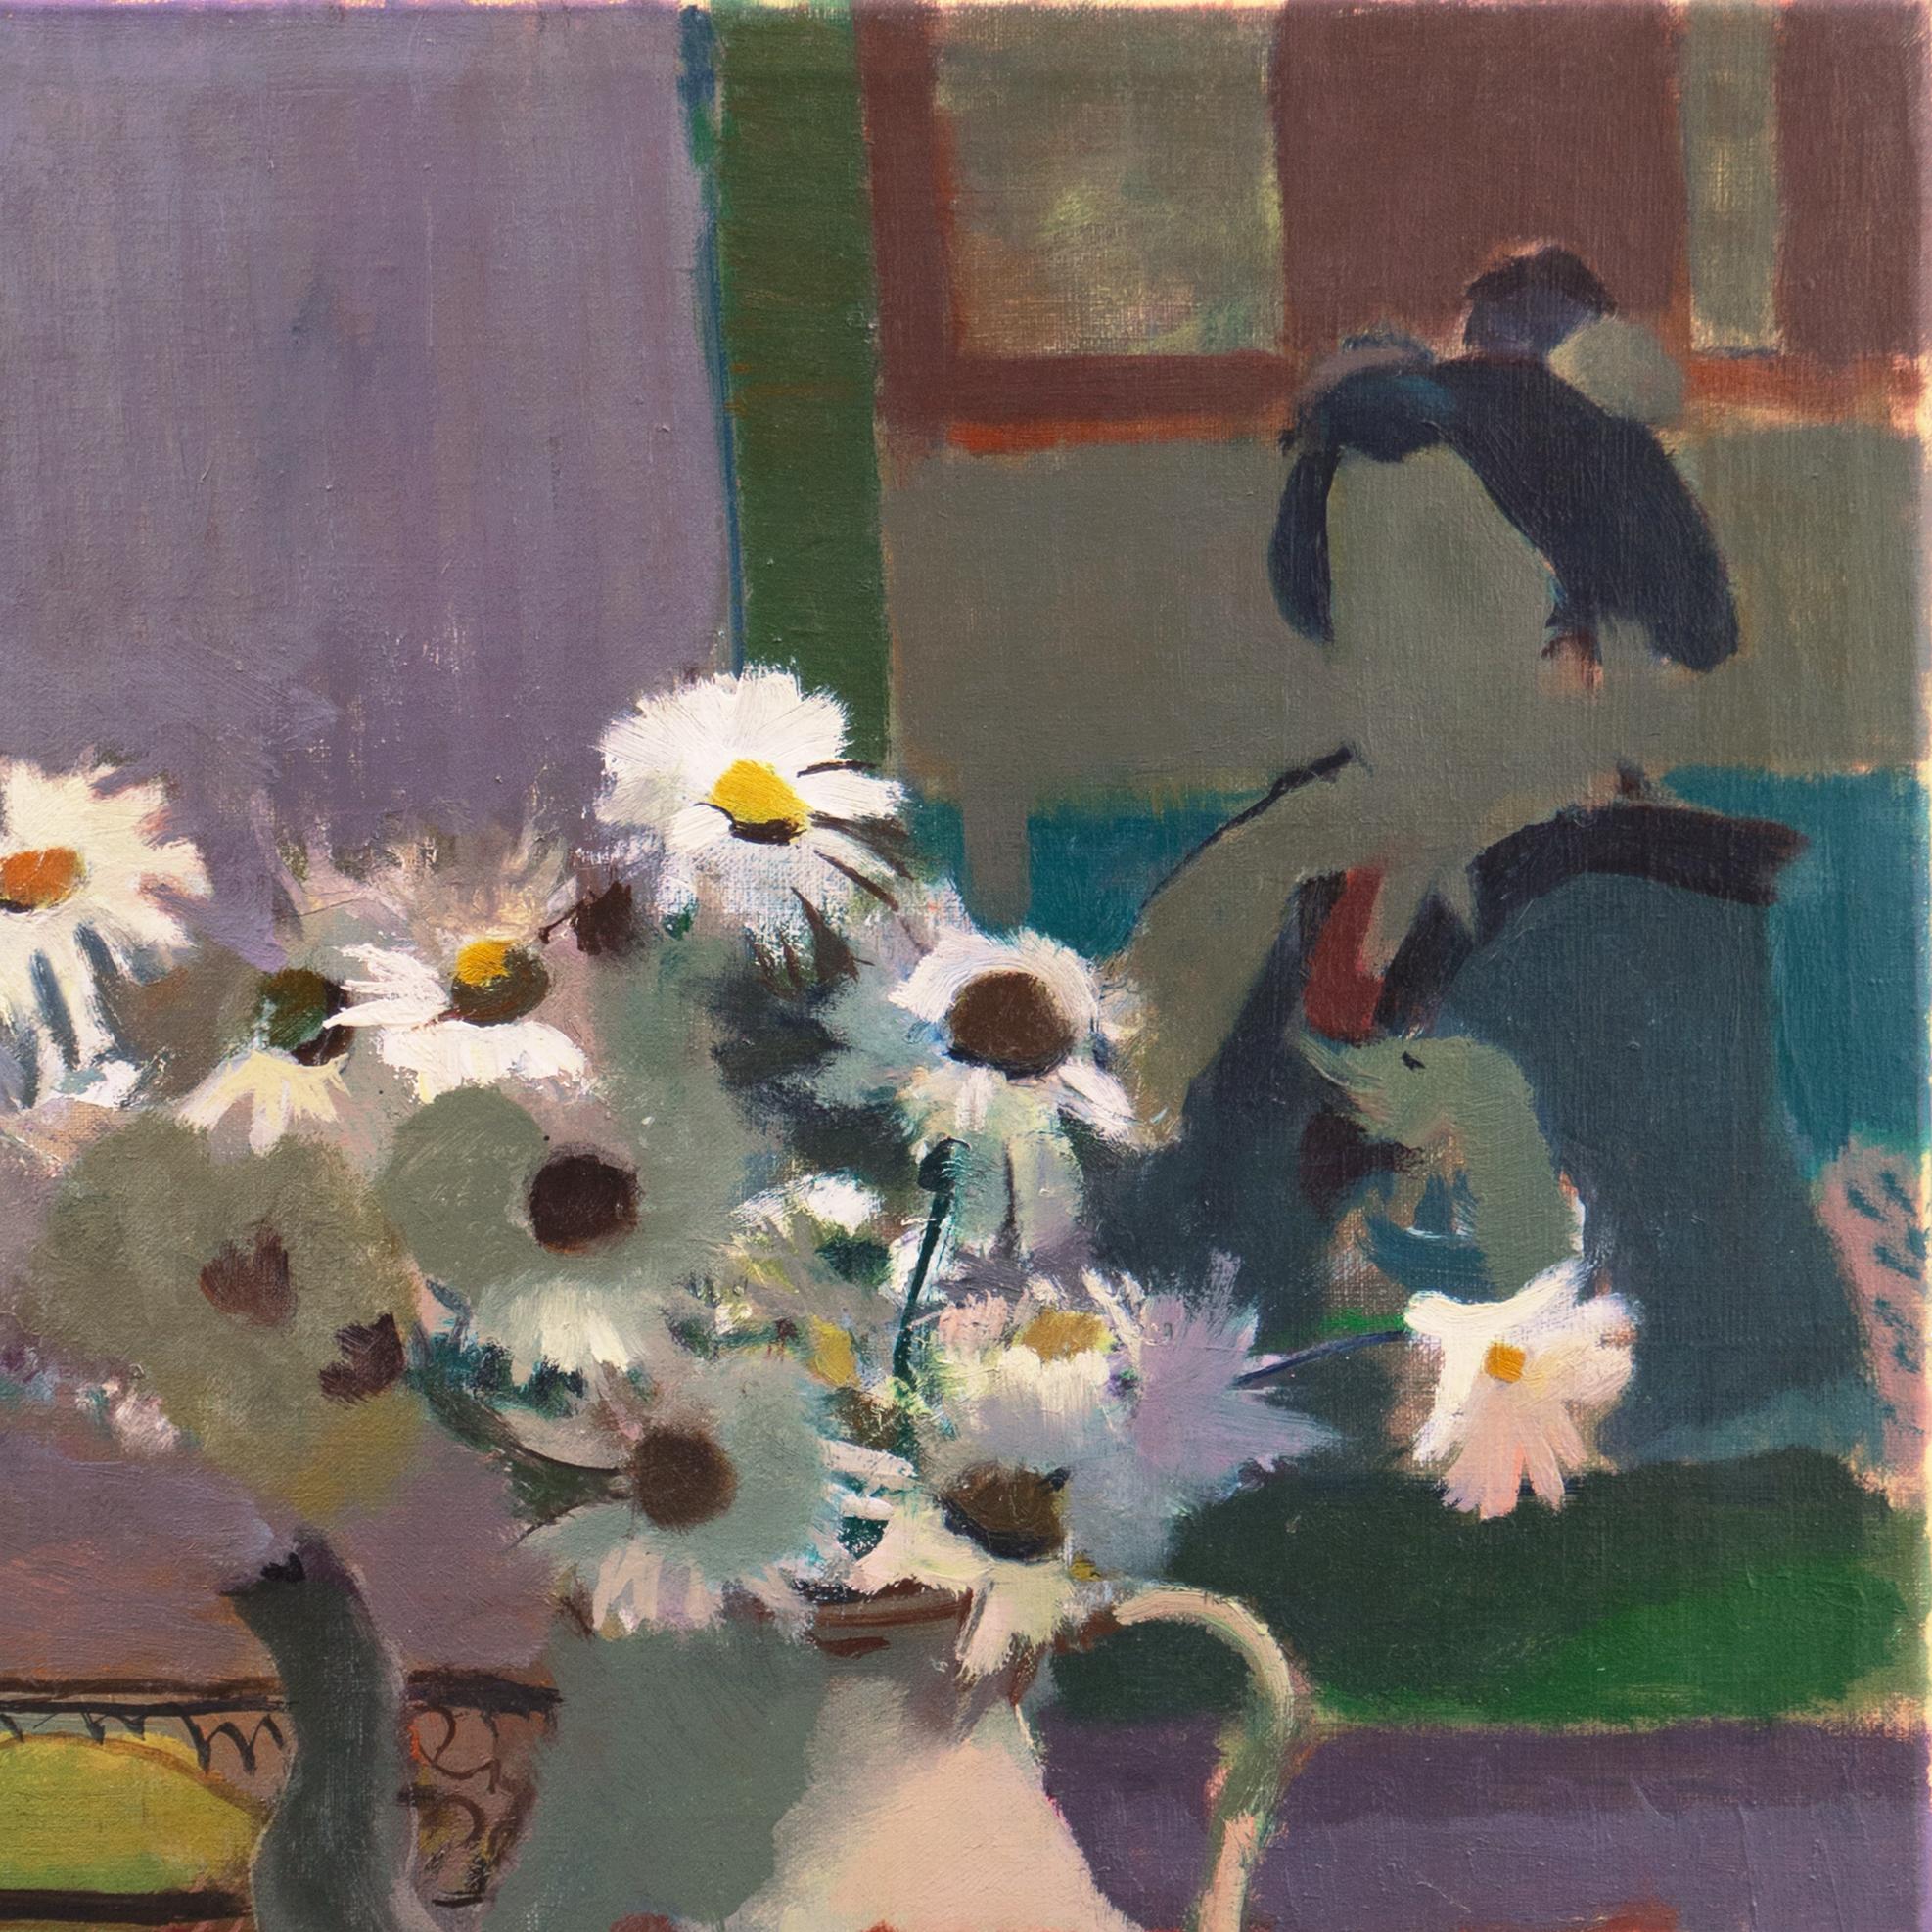 Signed lower left, 'V. Isbrand' for Victor Isbrand (Danish, 1897-1989) and painted circa 1965.

 A substantial Post-Impressionist oil still-life showing a view of yellow and white daisies loosely arranged in a ceramic chocolate pot set on a table